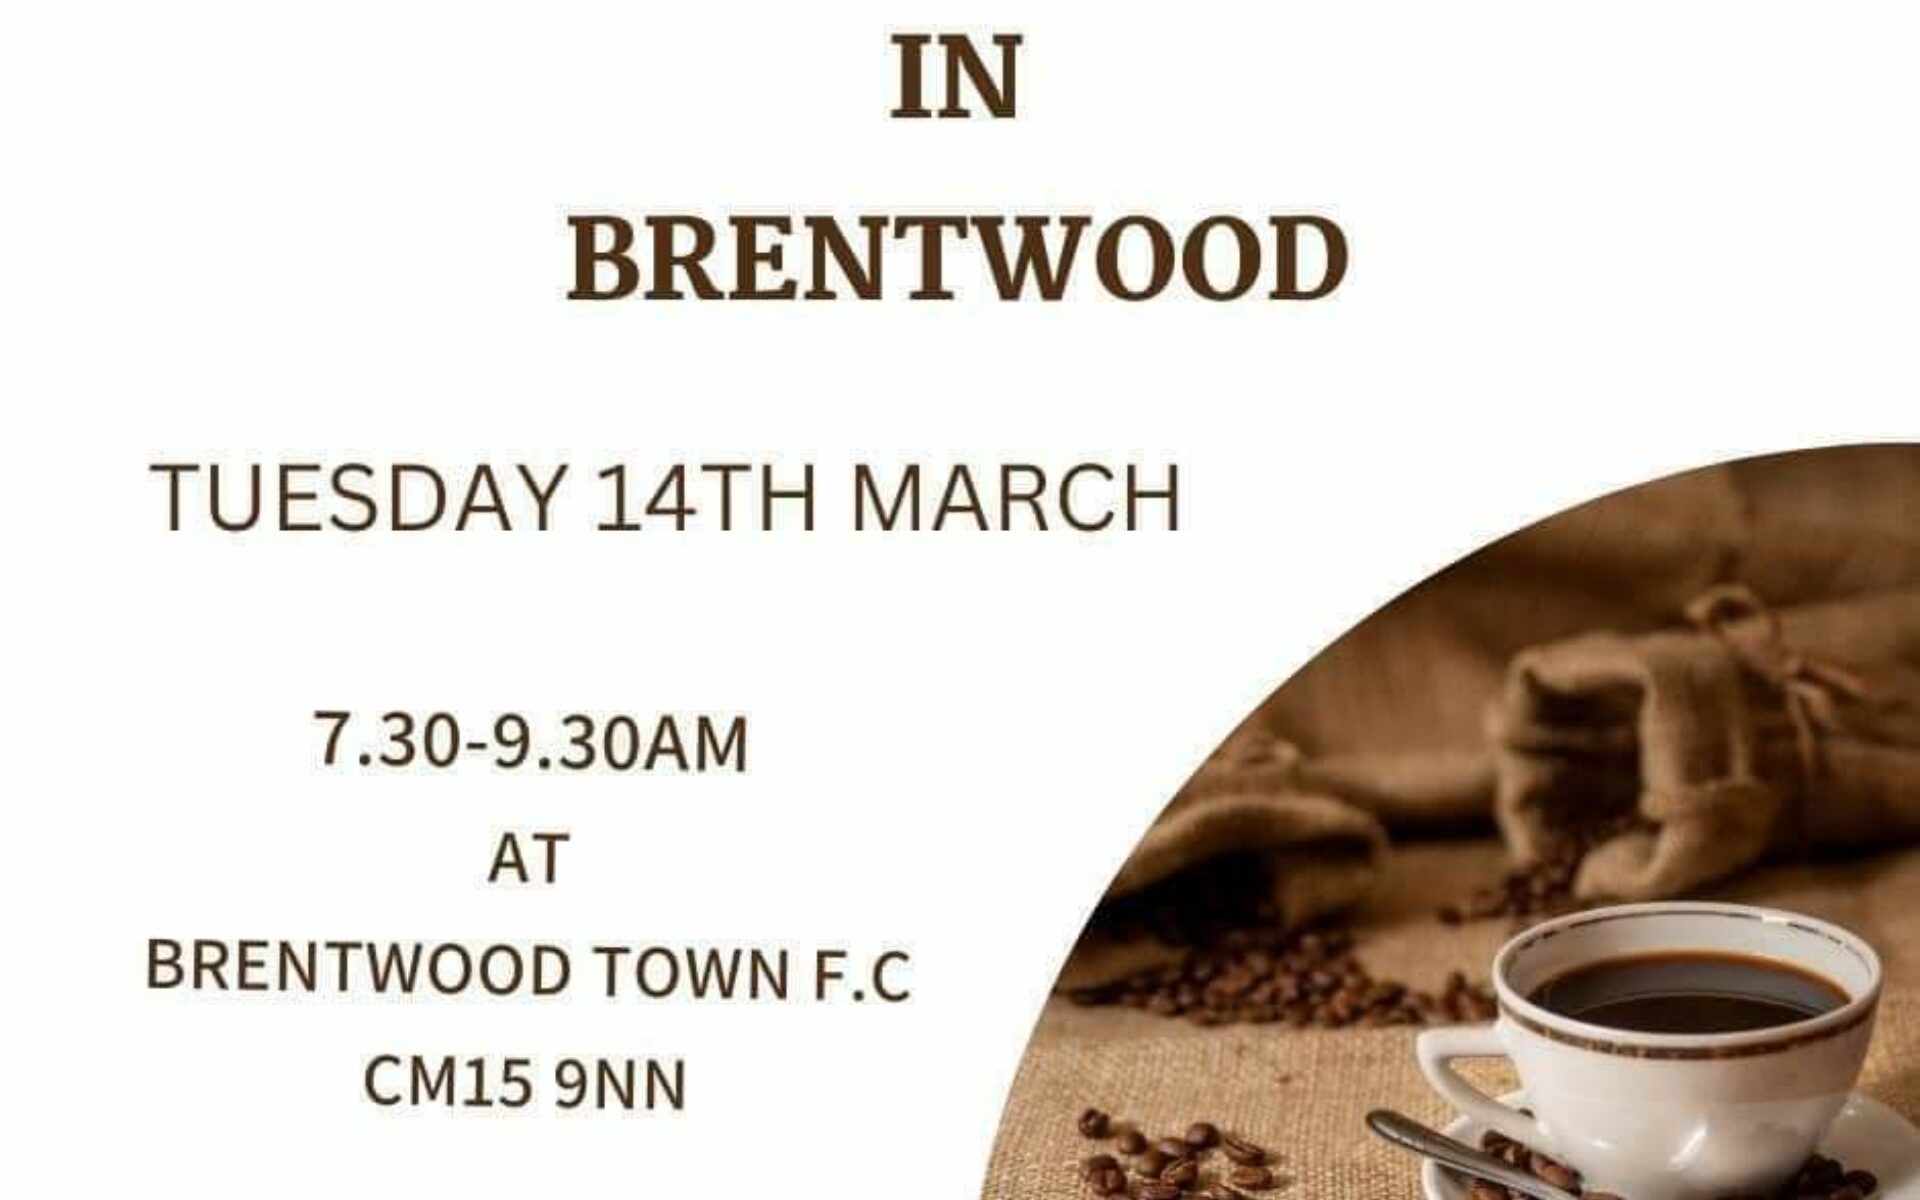 Brentwood Town Networking Morning Featured Image